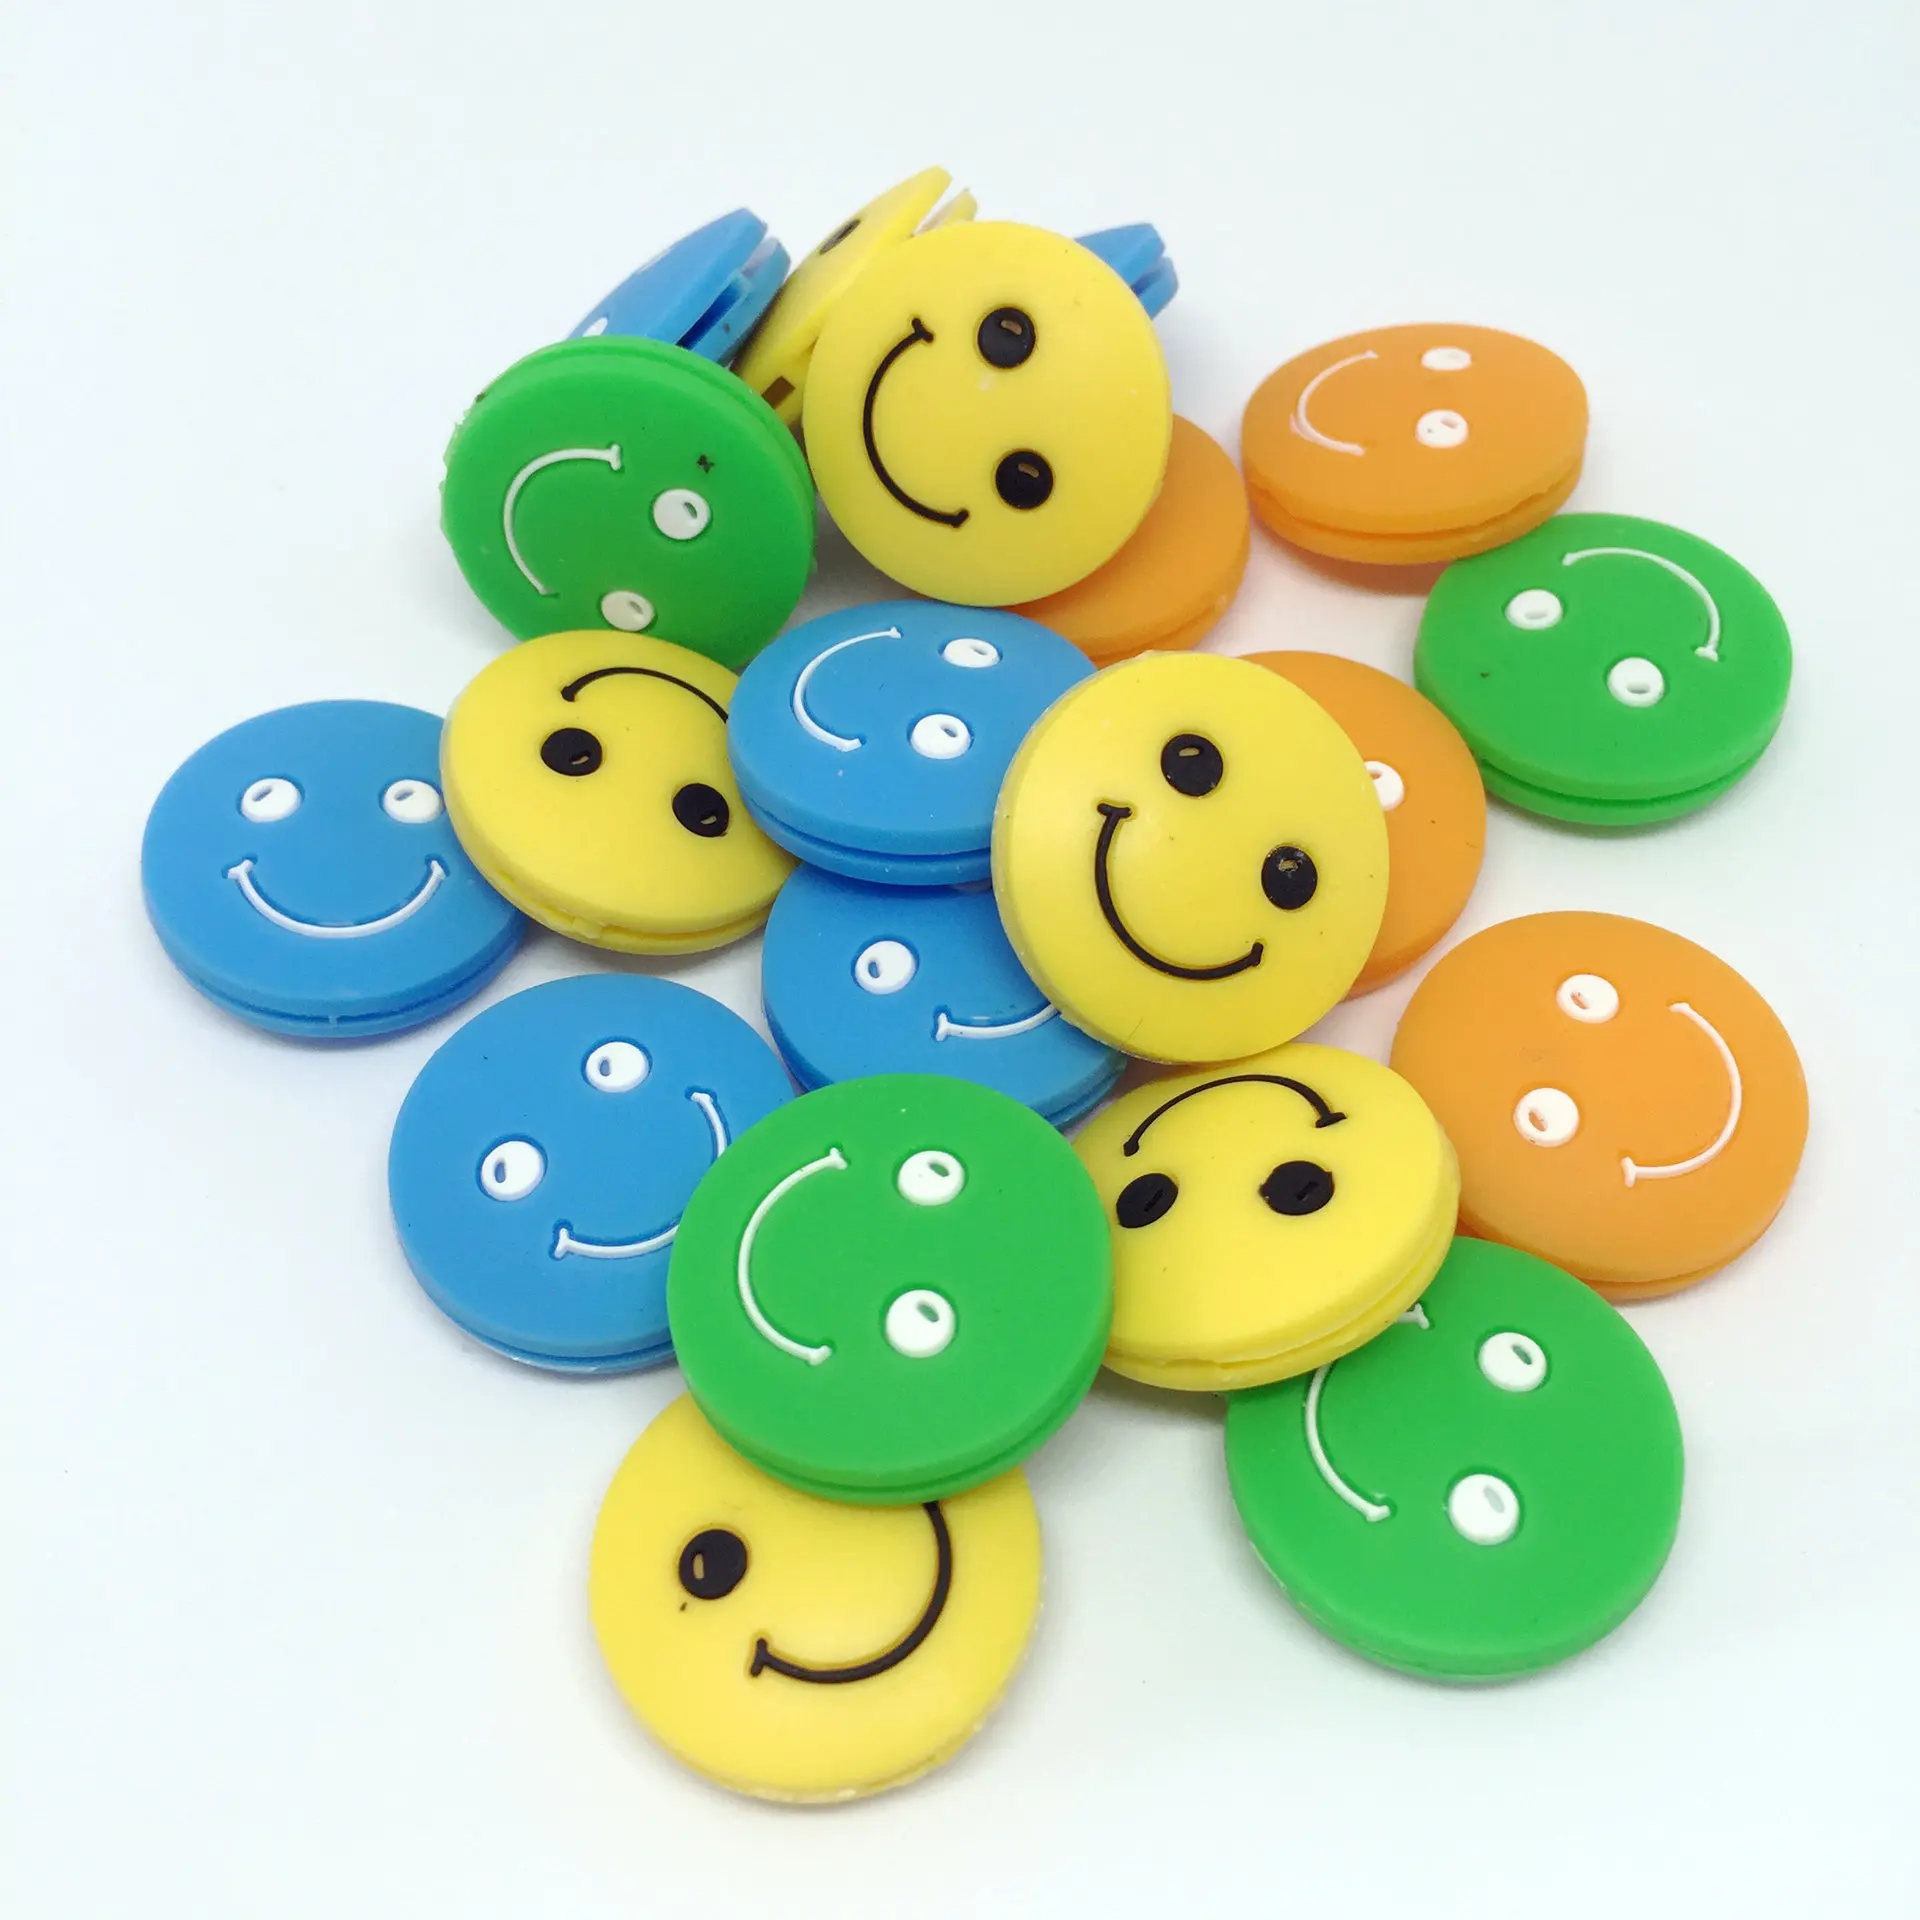 

1PCS Tennis Racket Shock Absorber Anti-vibration New Smiley Silicone Sports Accessories to Reduce Vibration for Strings Racquets